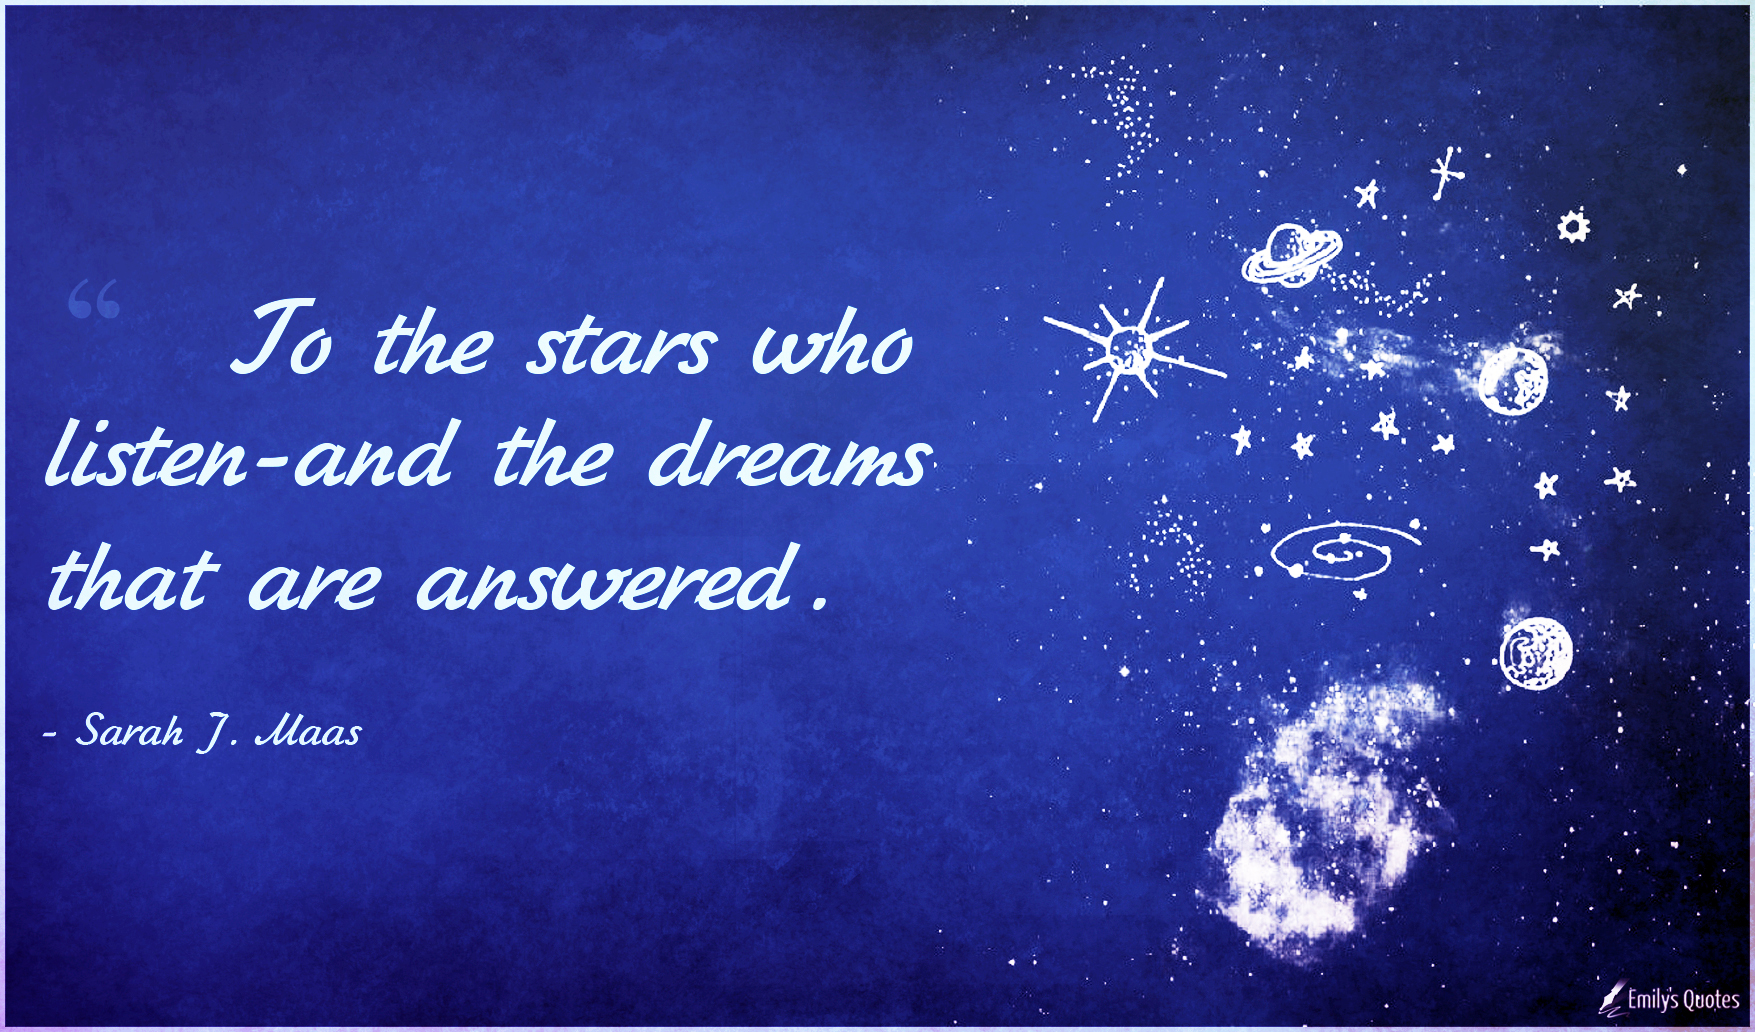 To the stars who listen-and the dreams that are answered